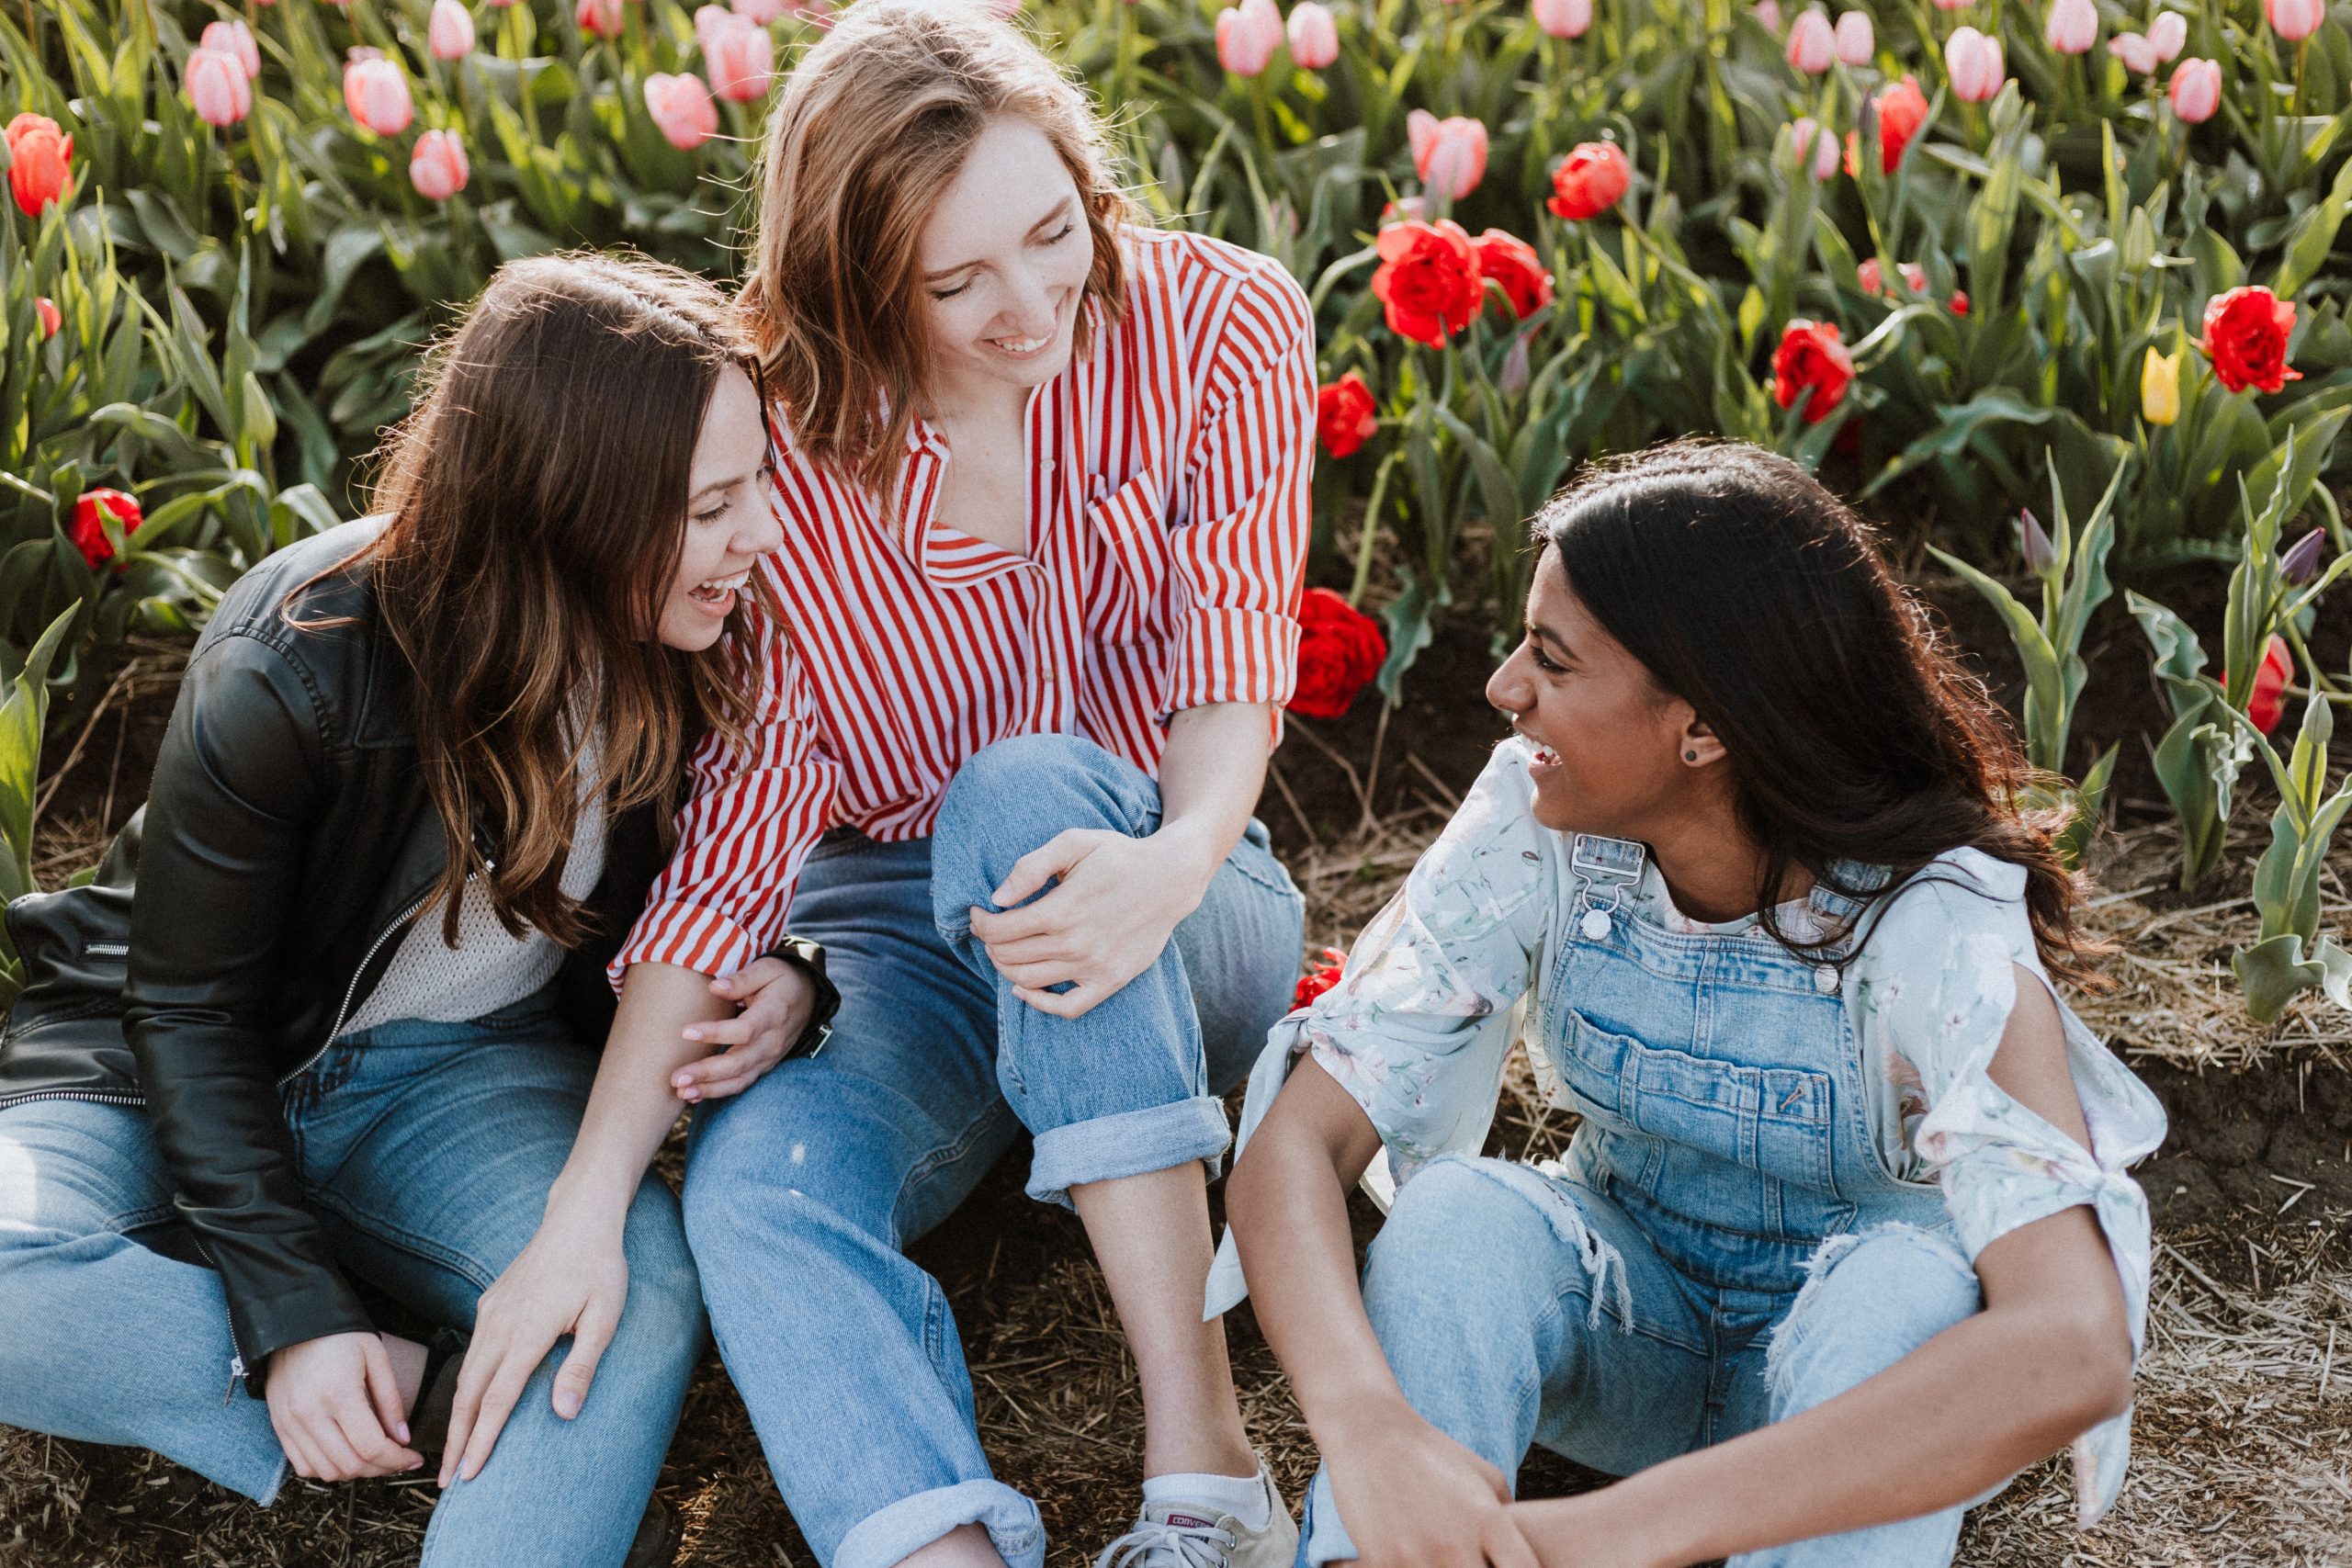 A group of three young women wearing jeans sit on the ground chatting and laughing